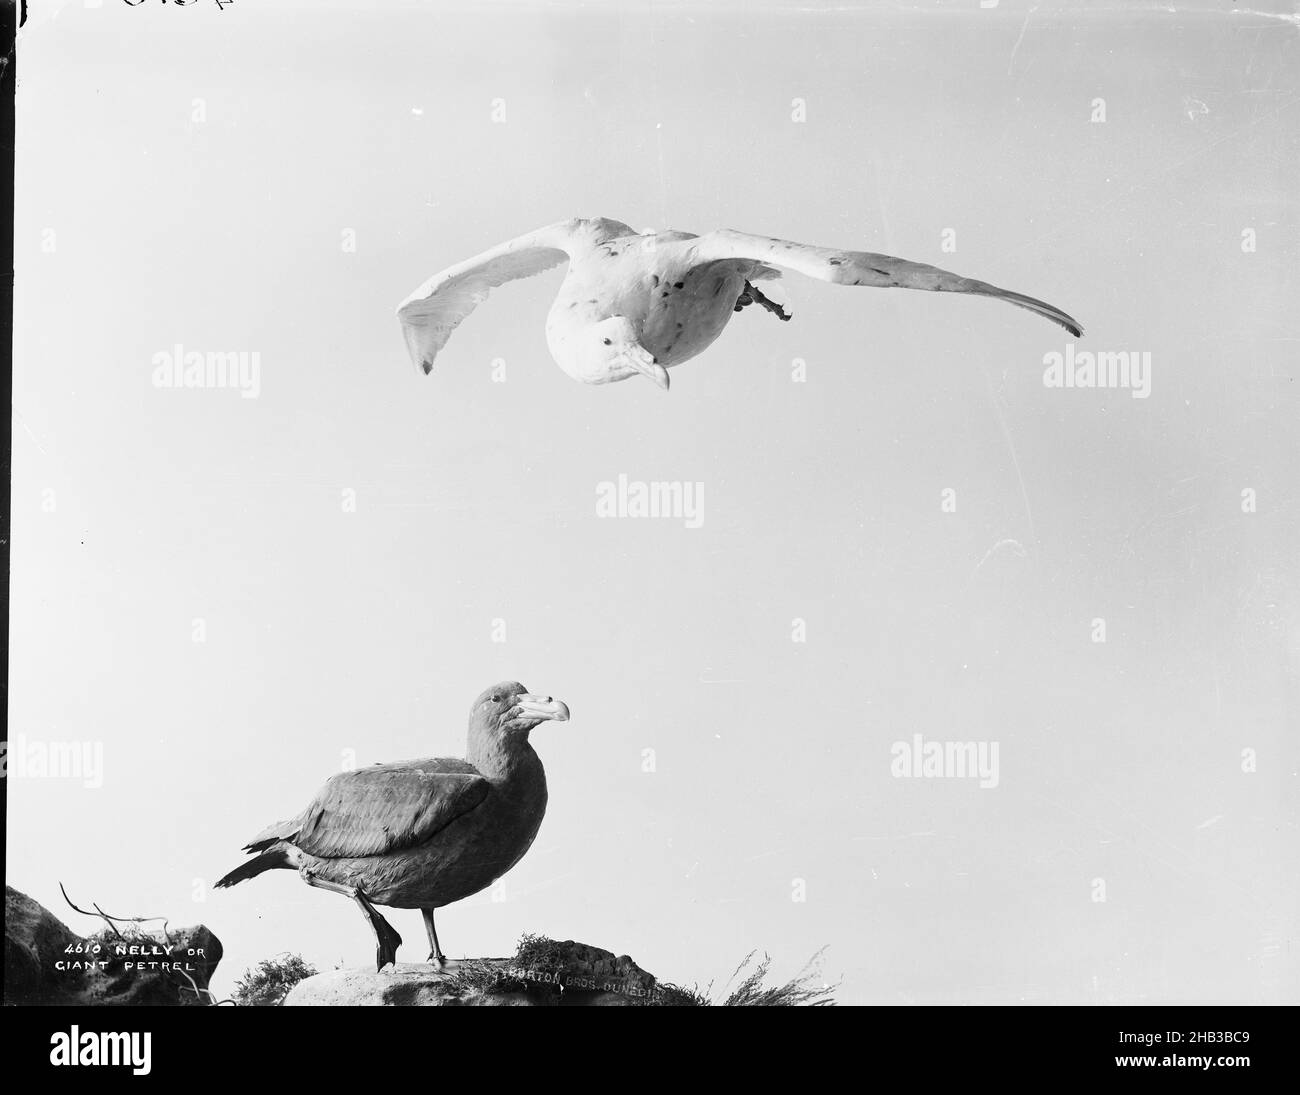 Nelly or Giant Petrel, Burton Brothers studio, photography studio, 1889, Dunedin, black-and-white photography, Display of two stuffed birds Stock Photo